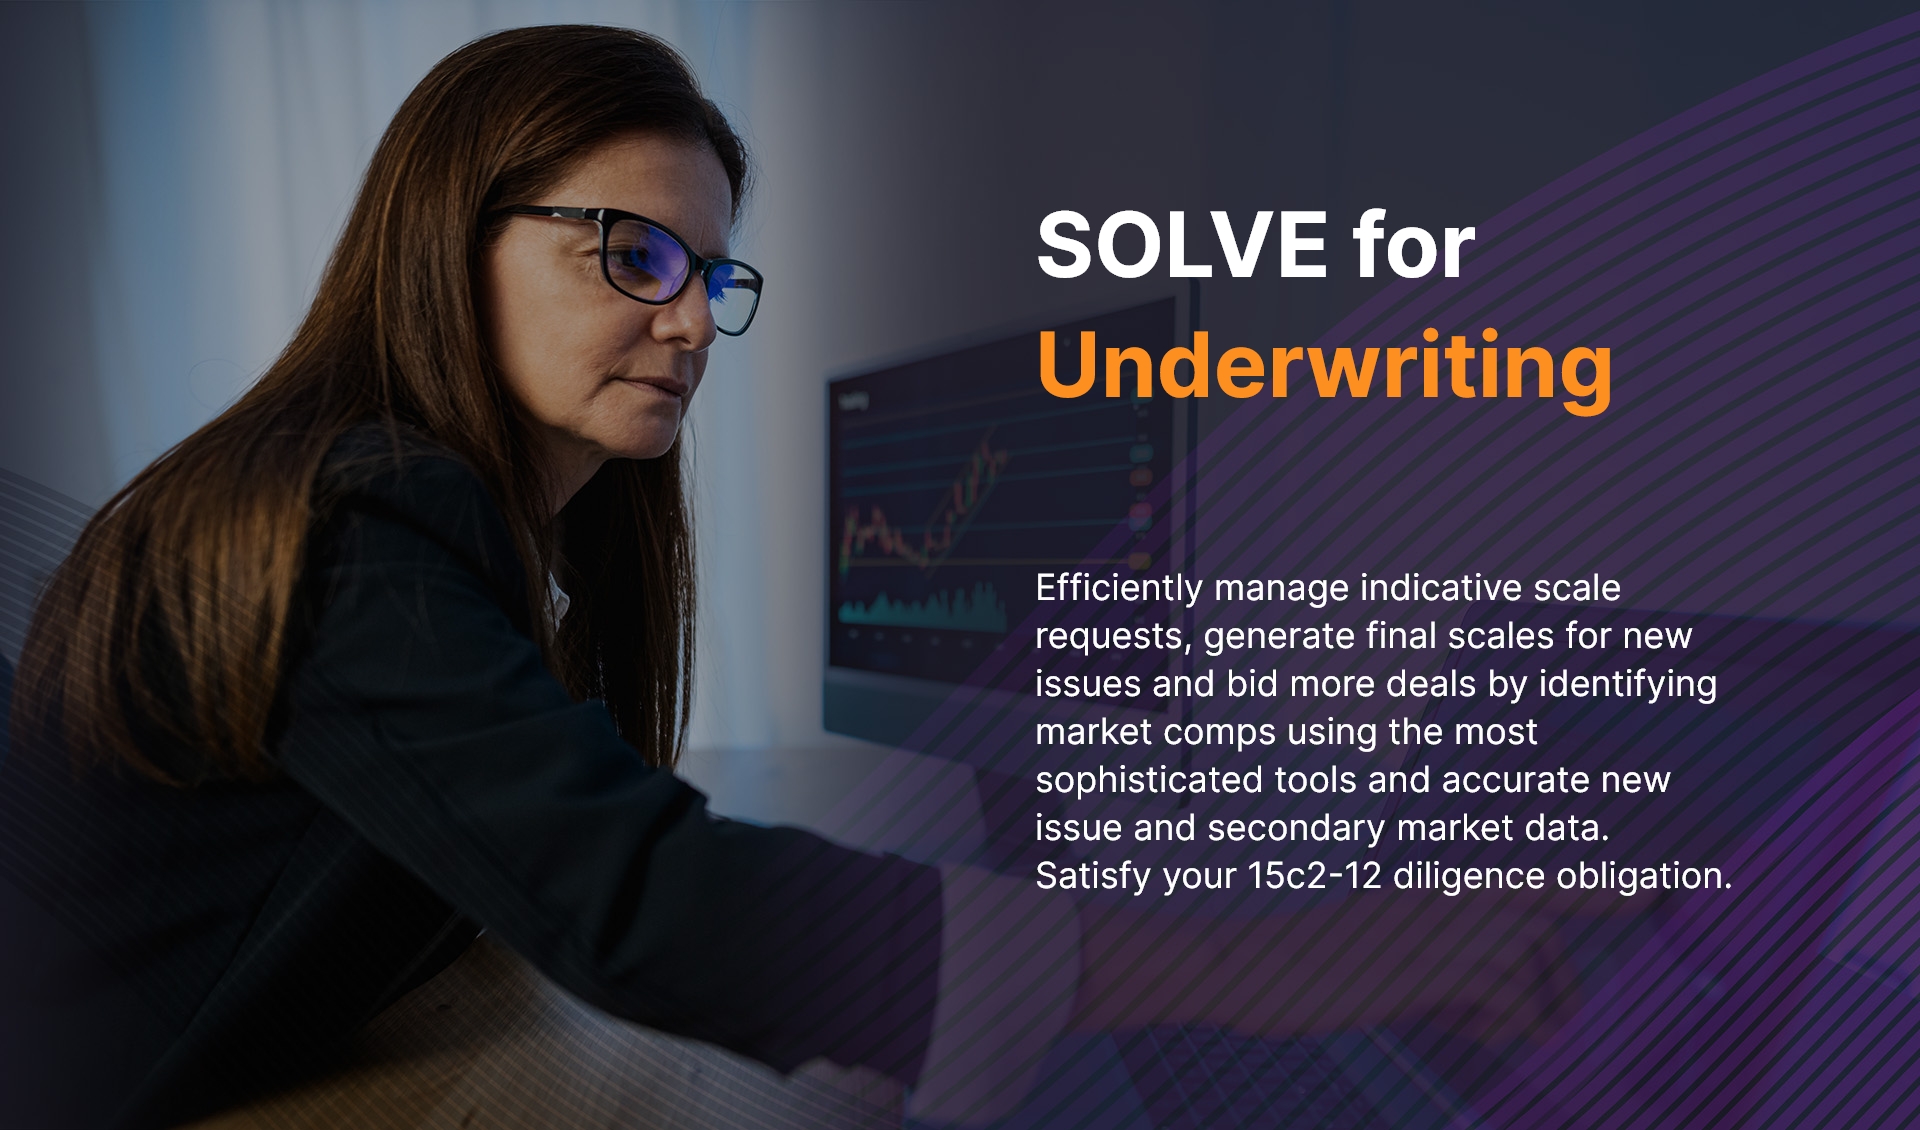 SOLVE for Underwriting